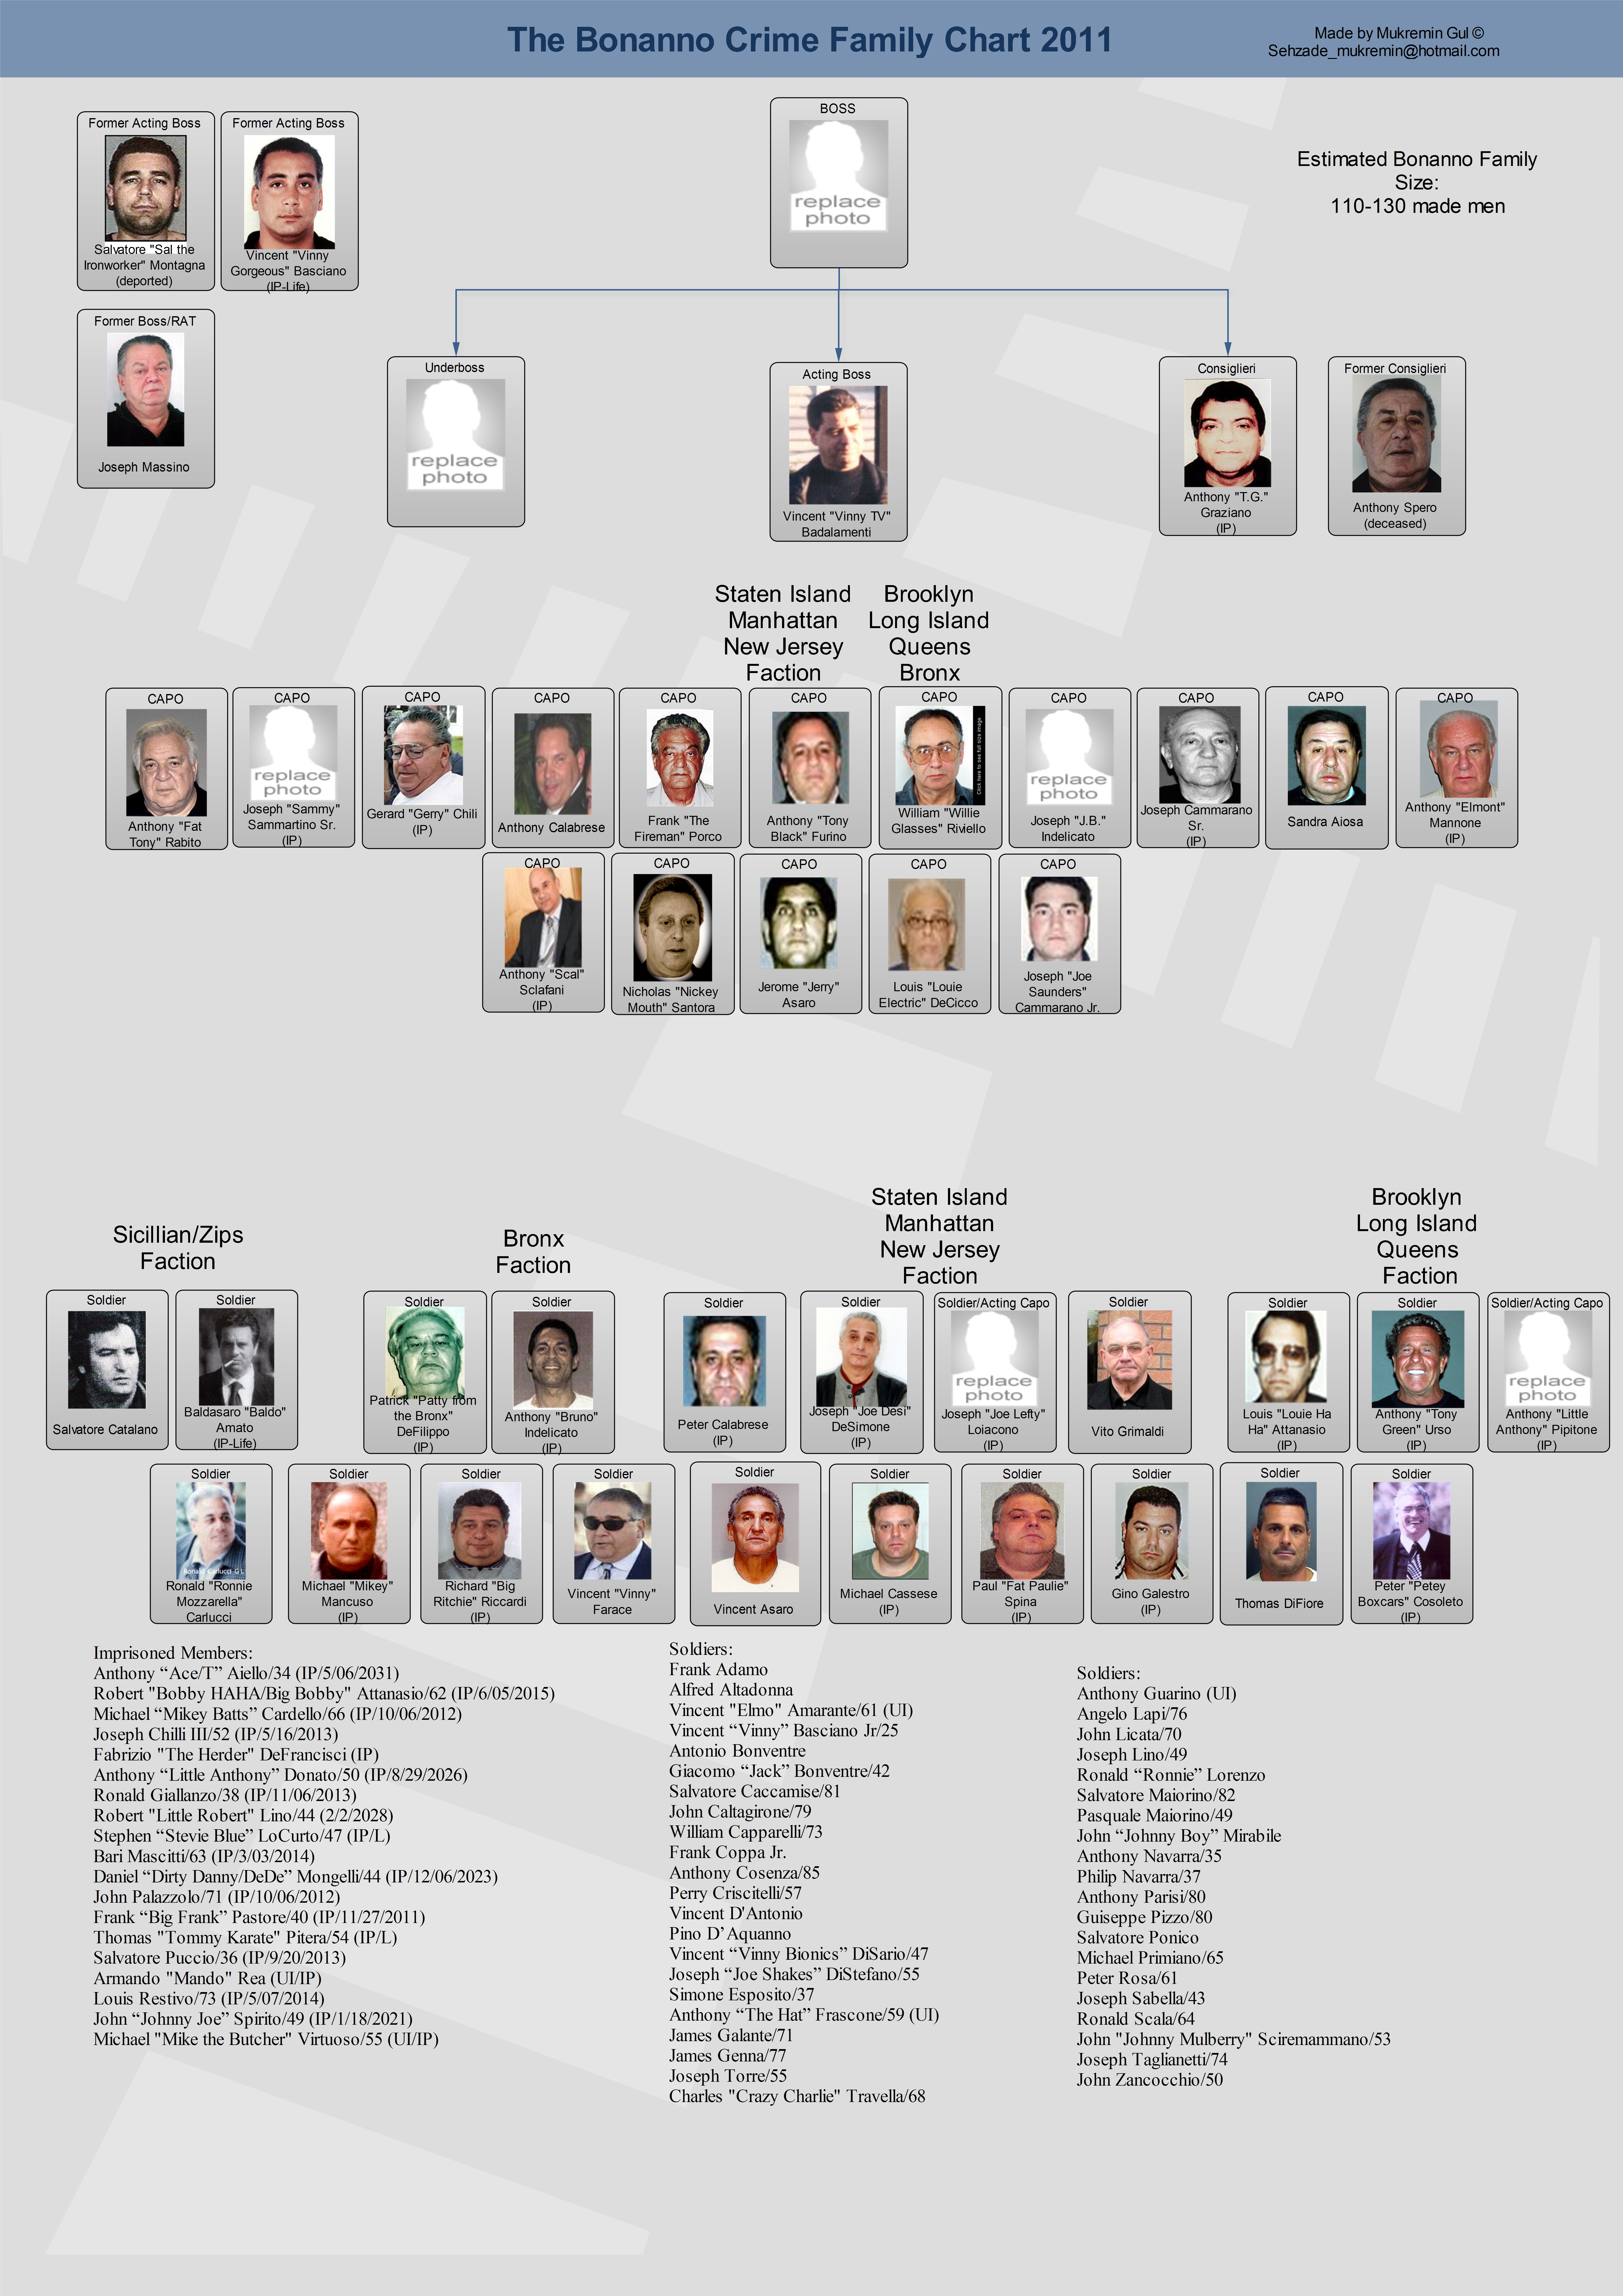 Trafficante Family Chart